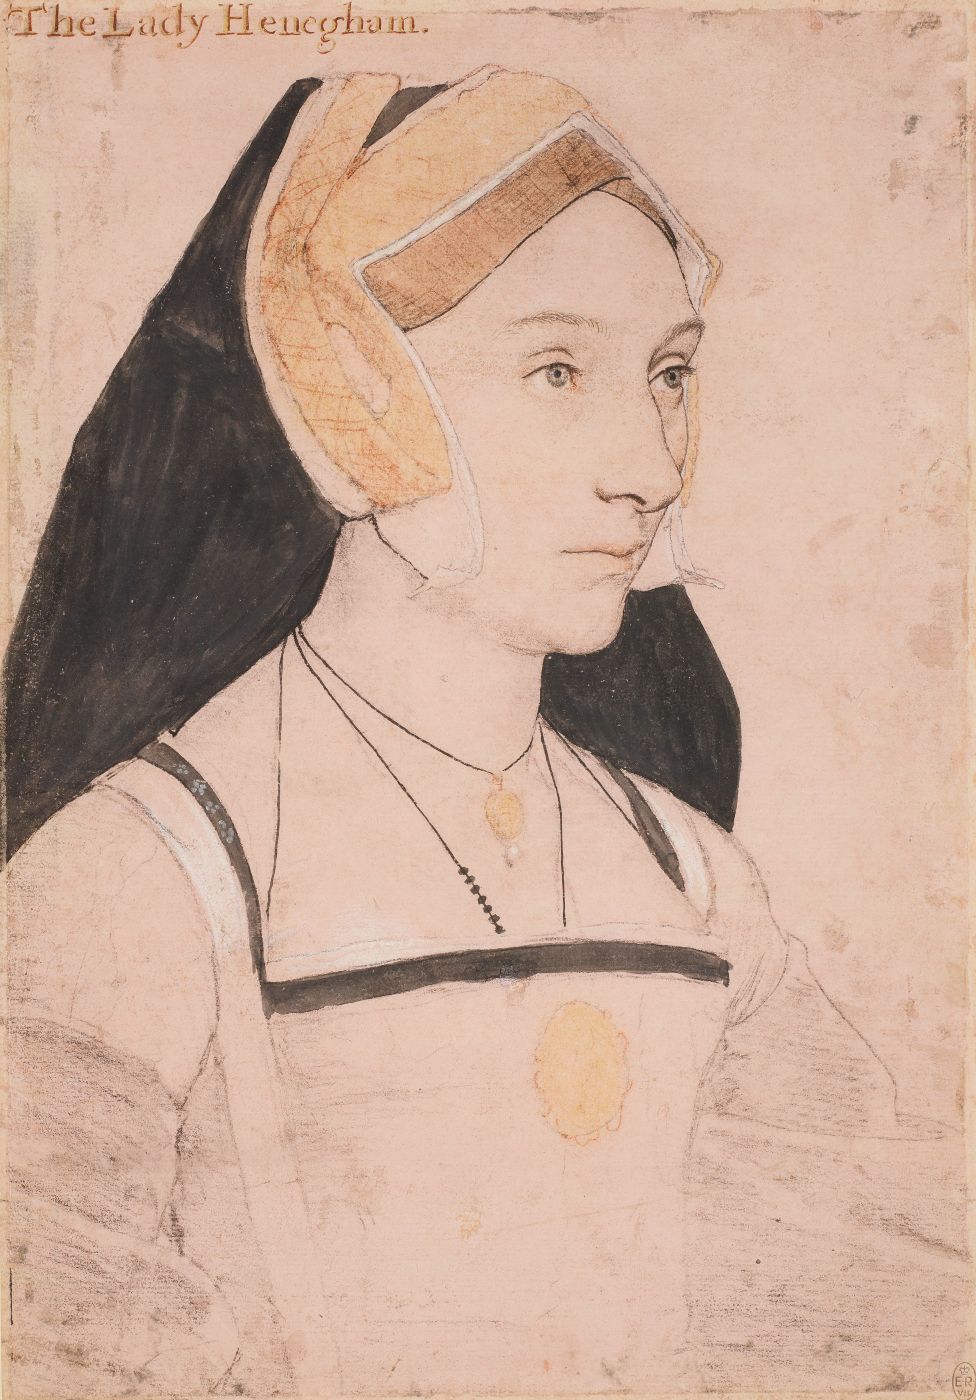 Mary Shelton (later Lady Heveningham) in a sketch by Holbein